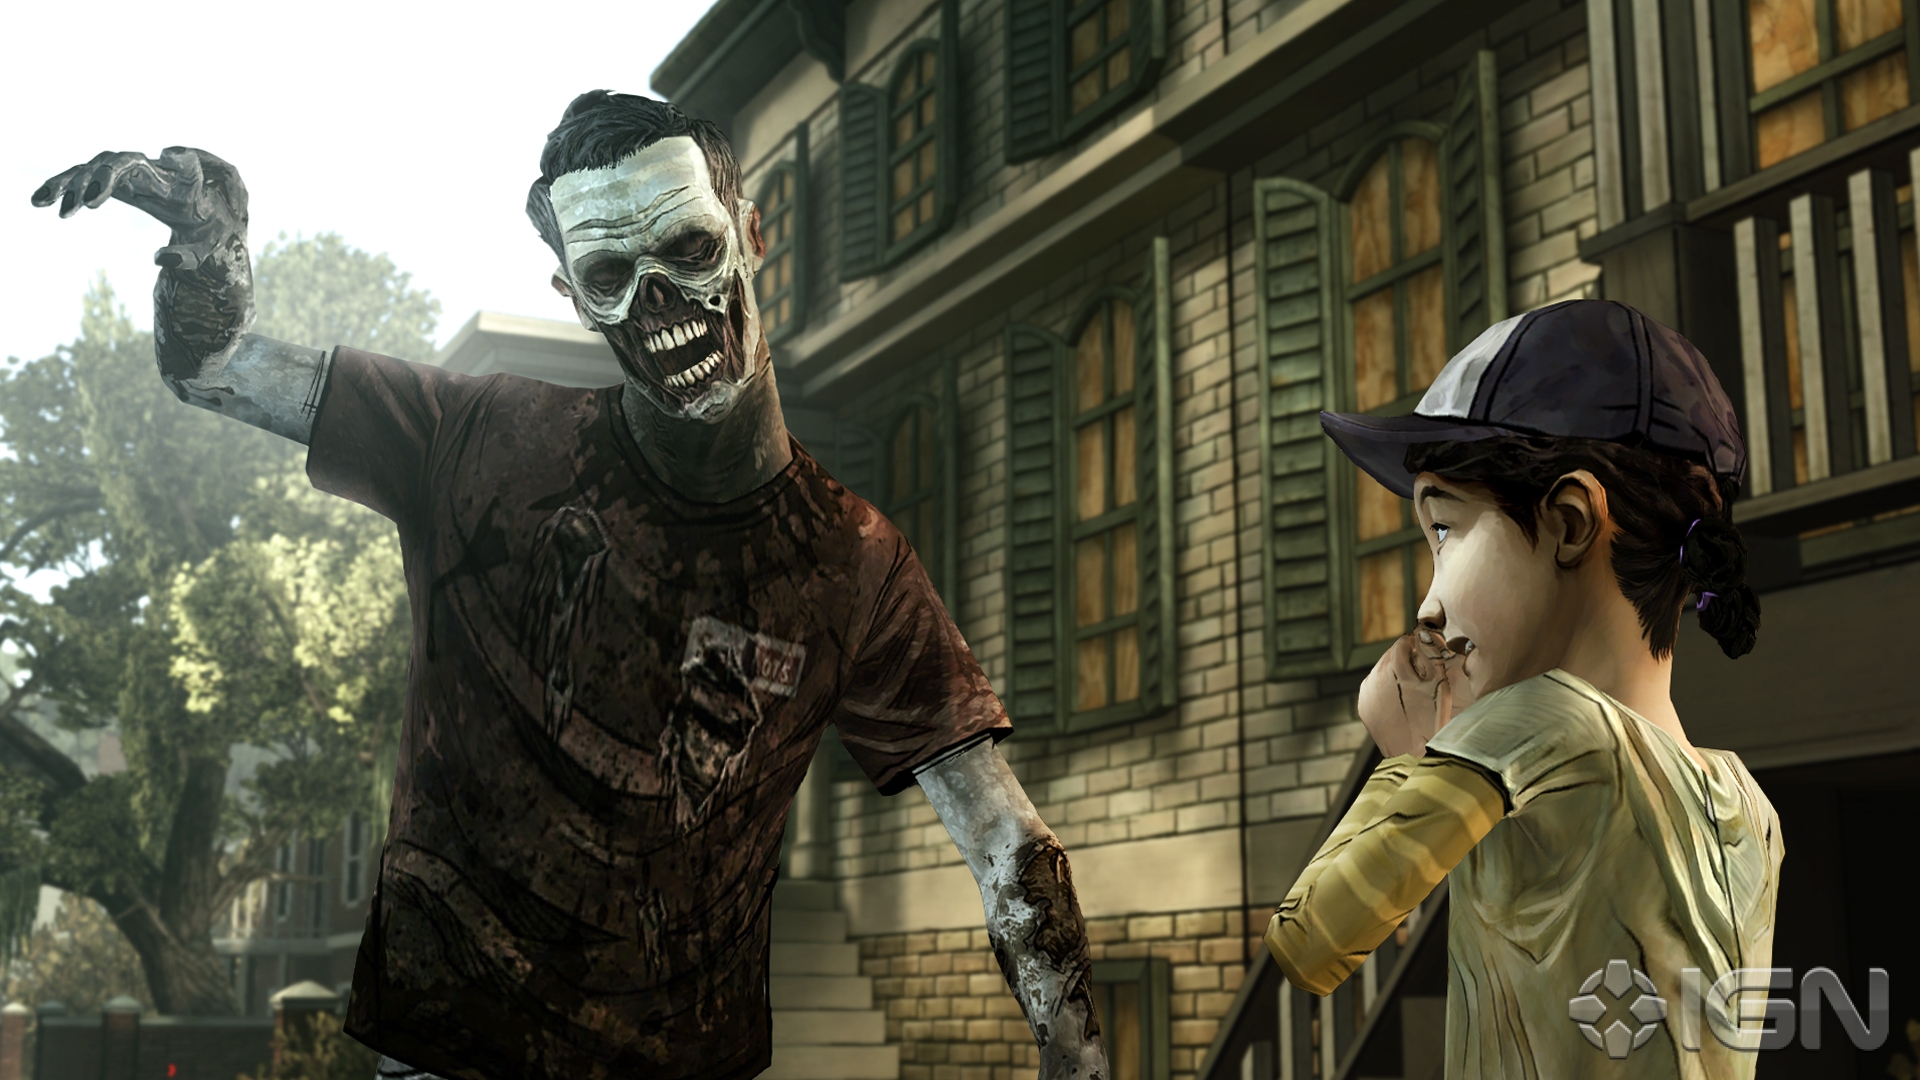 The Walking Dead: Episode 4 - Around Every Corner [ENG][L] /Telltale Games/ (2012) PC